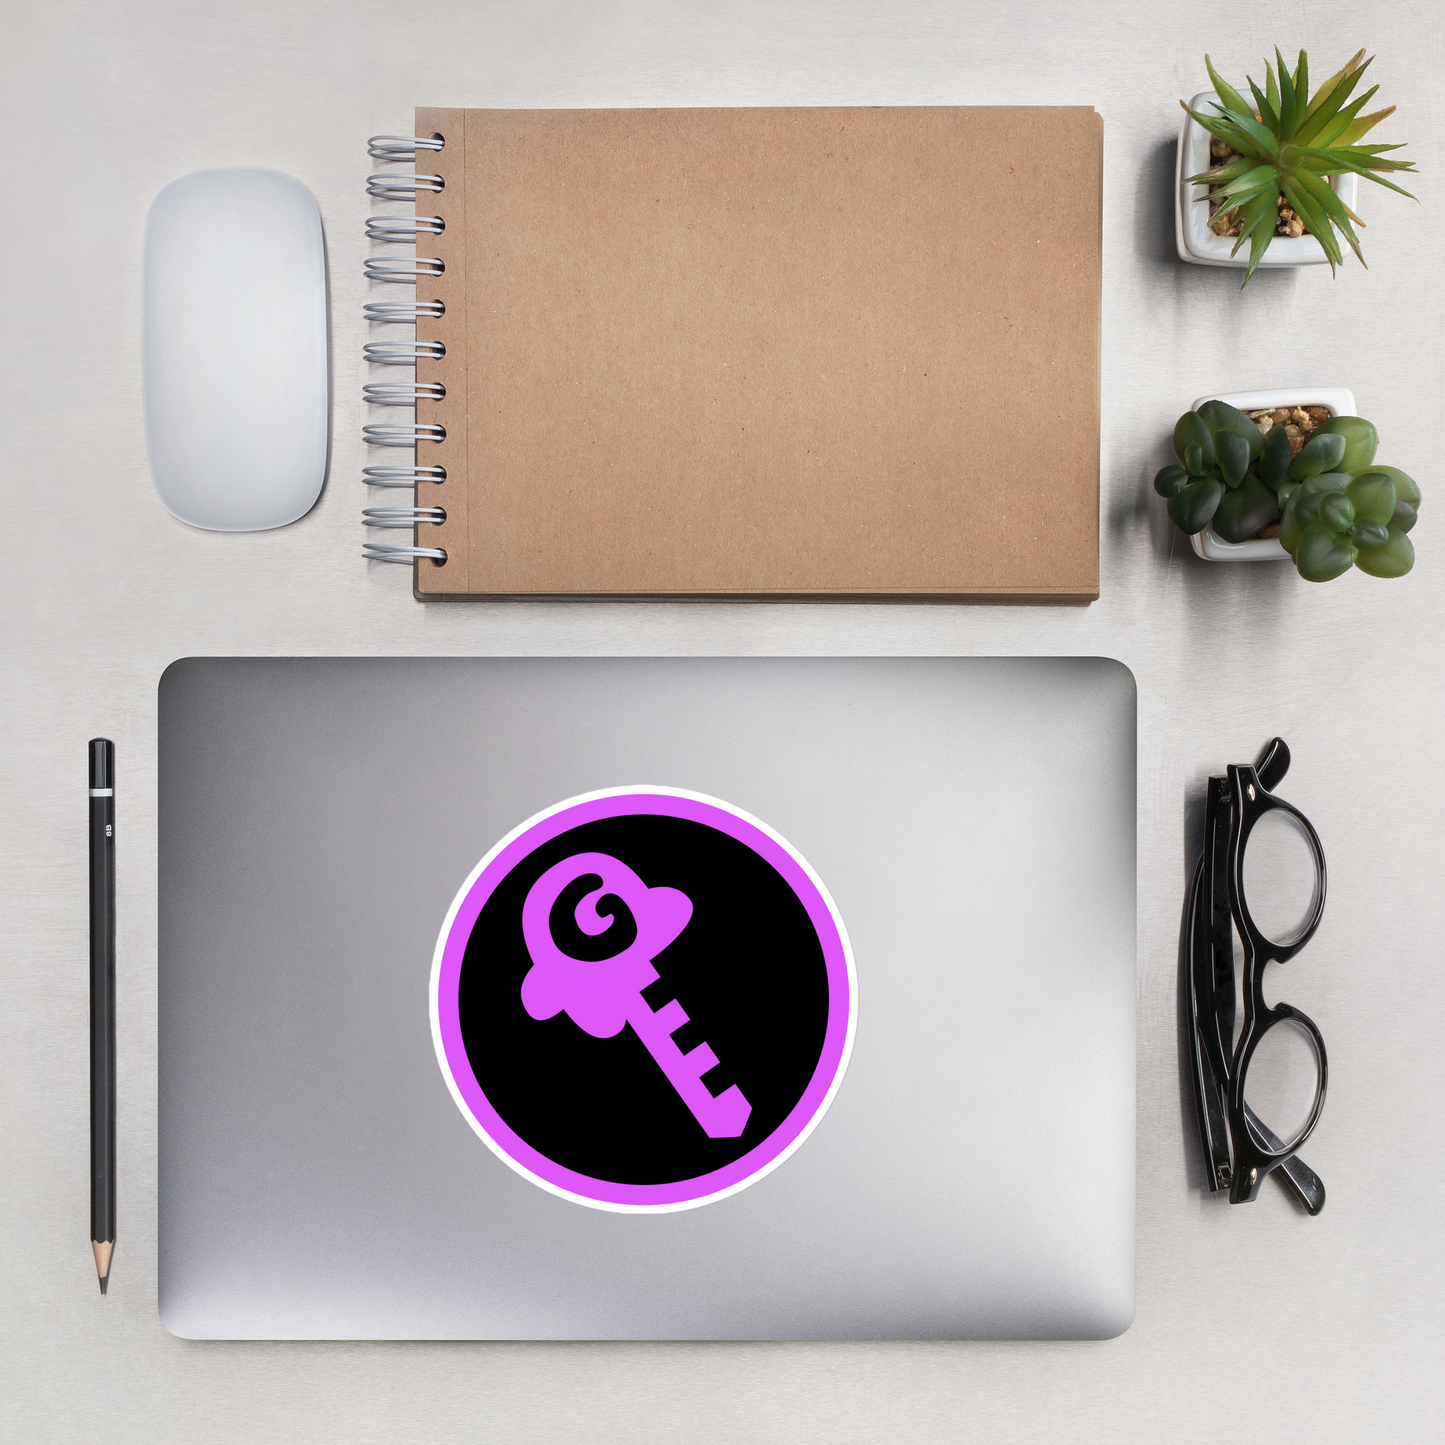 Gkey logo bubble-free stickers (pink and black logo)